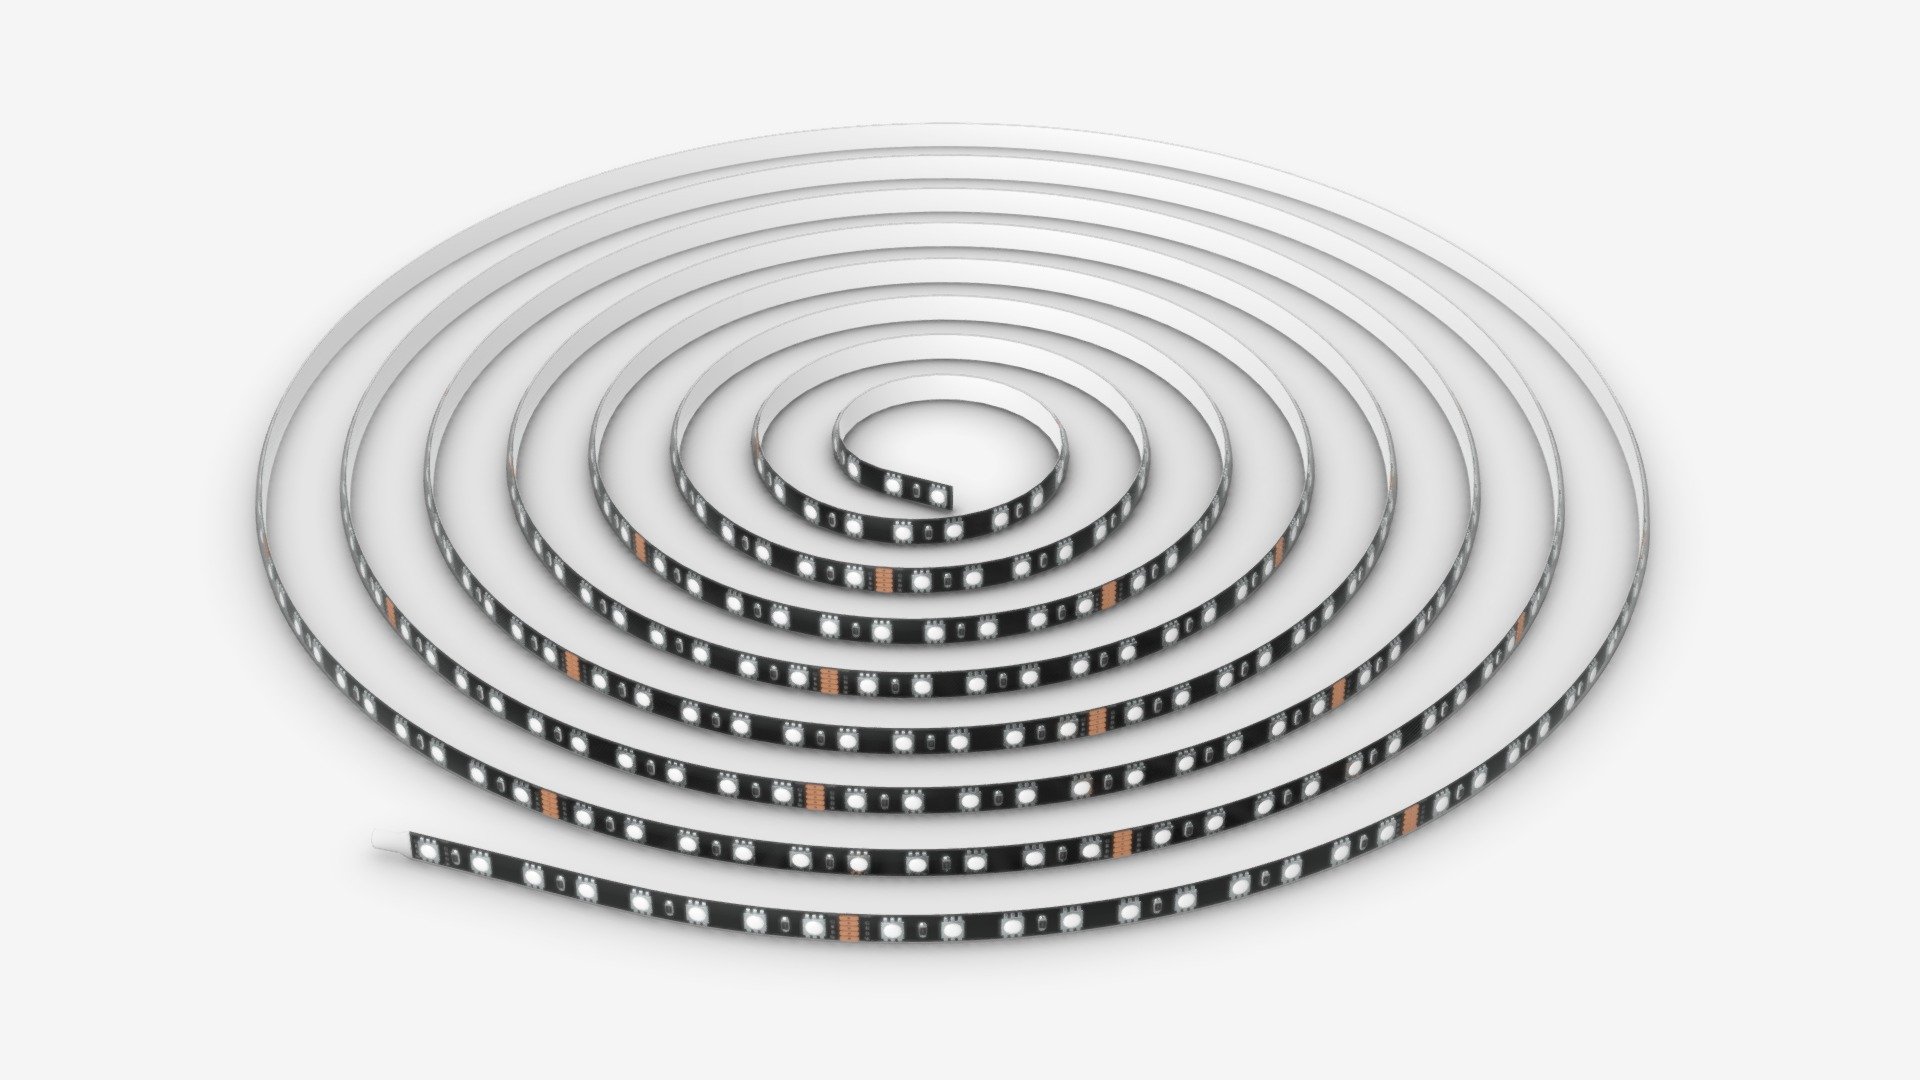 LED strip roll - Buy Royalty Free 3D model by HQ3DMOD (@AivisAstics) 3d model